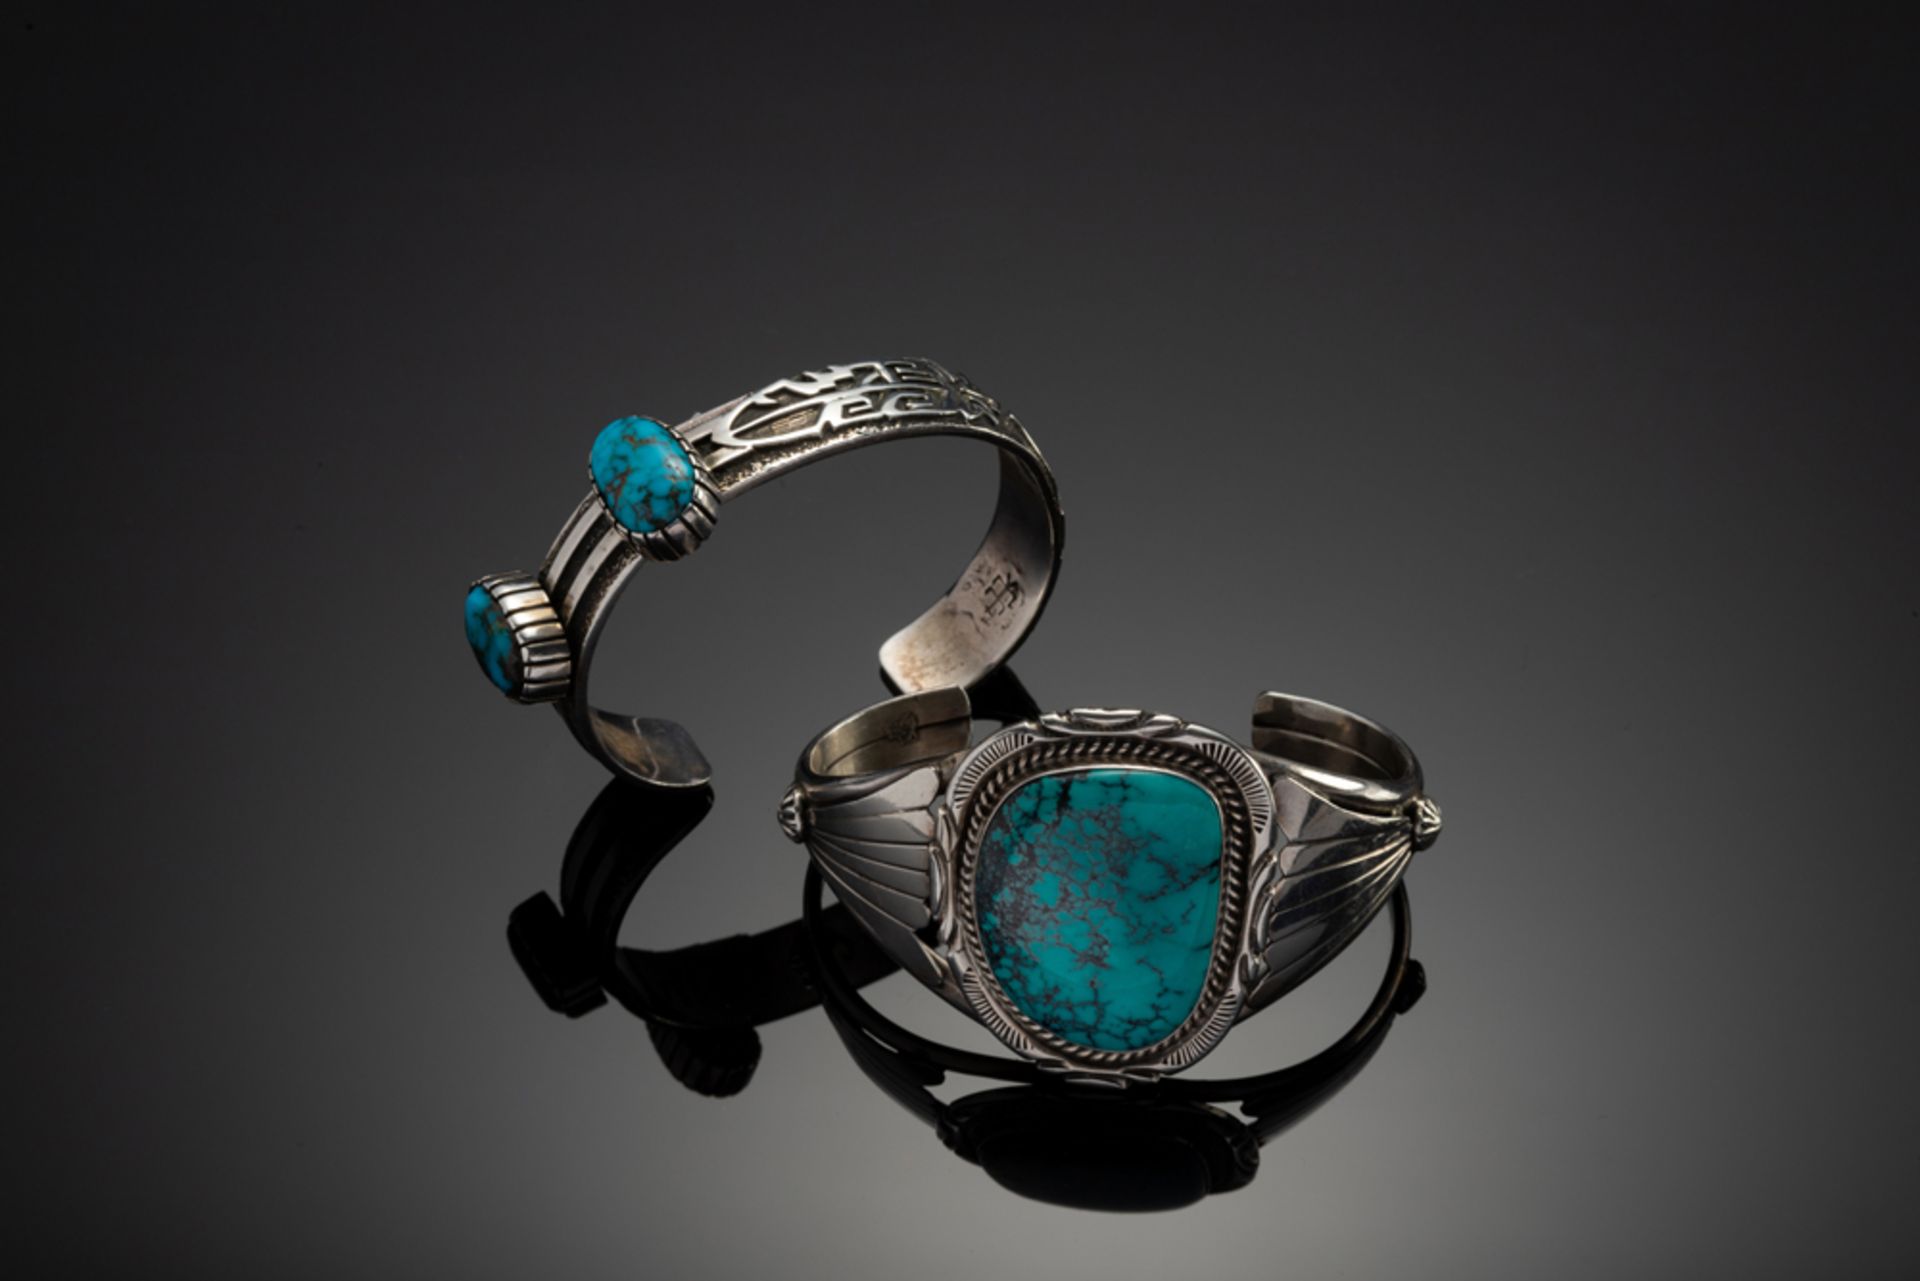 This consists of two Turquoise and Silver Cuffs. The large Cuff has maker mark ""M / Sterling"" with